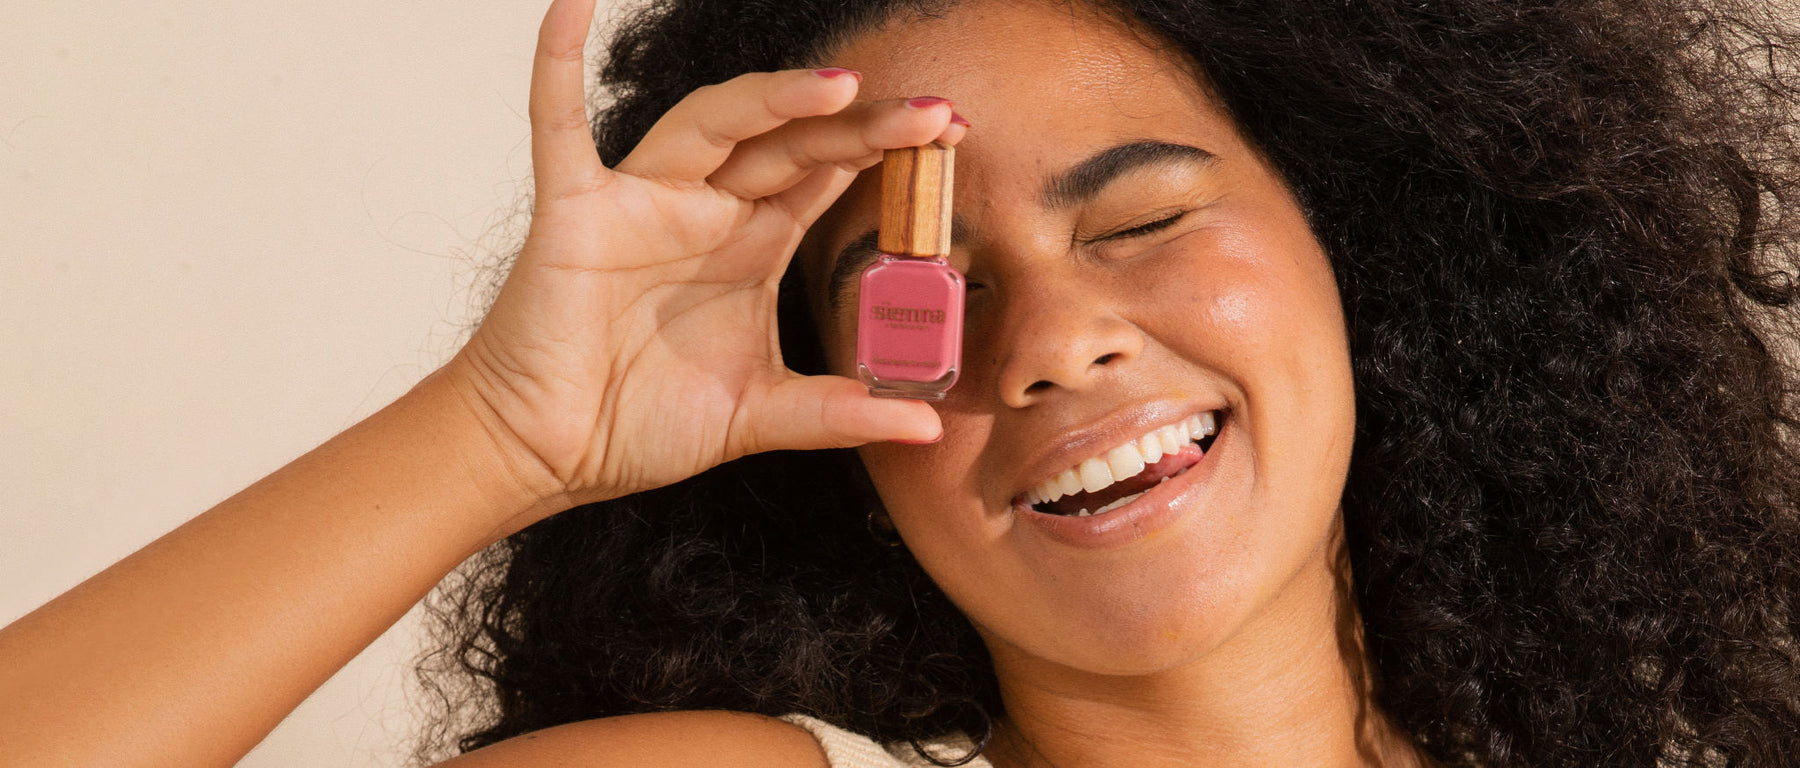 dark haired woman wearing pink nail polish and covering one eye with nail polish bottle